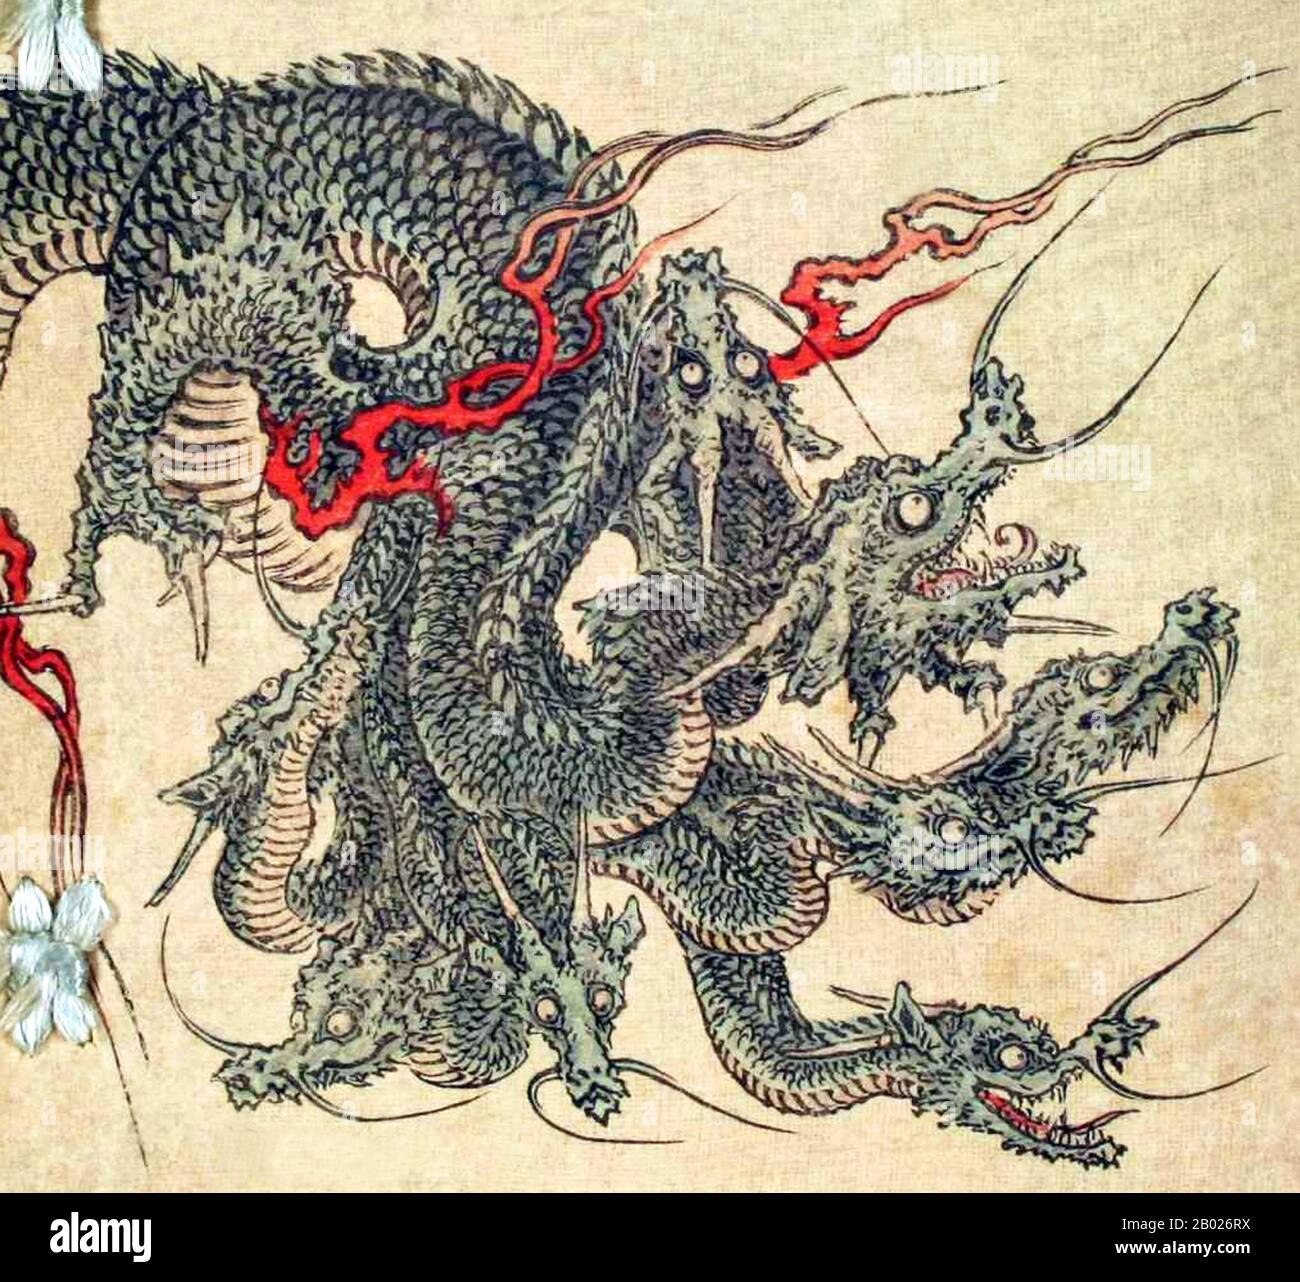 Yamata no Orochi (八岐の大蛇) or Orochi, translated as  Eight-Forked Serpent in English, is a legendary 8-headed and 8-tailed Japanese dragon that was slain by the Shinto storm-god Susanoo. Stock Photo